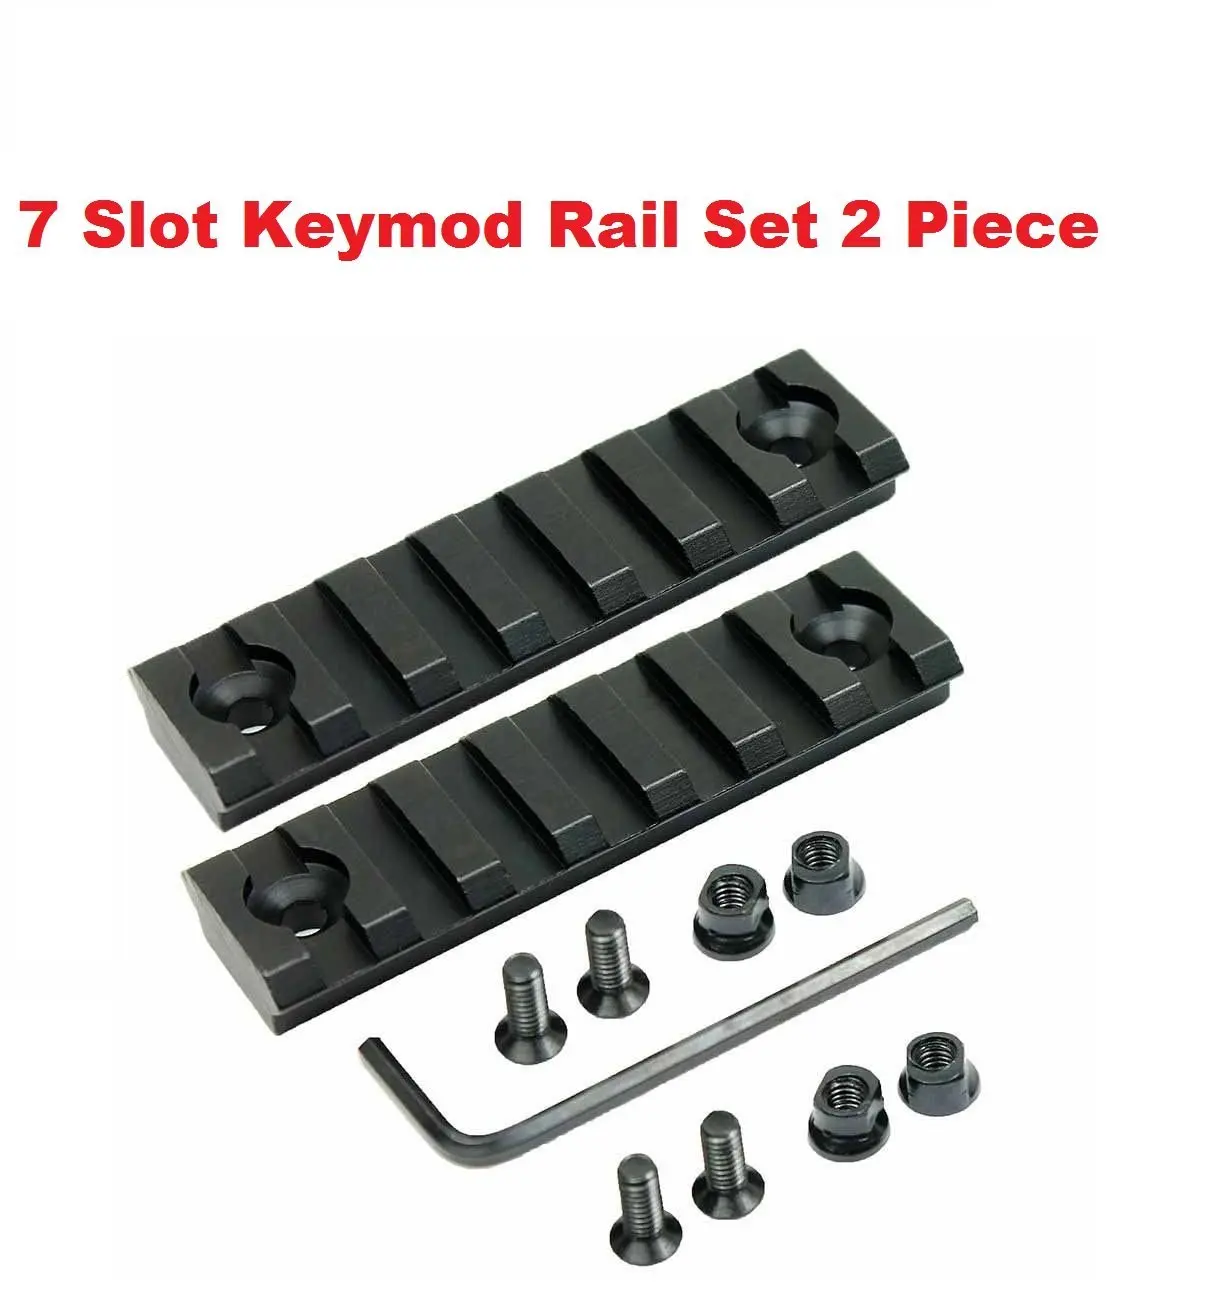 accessories for picatinny rails